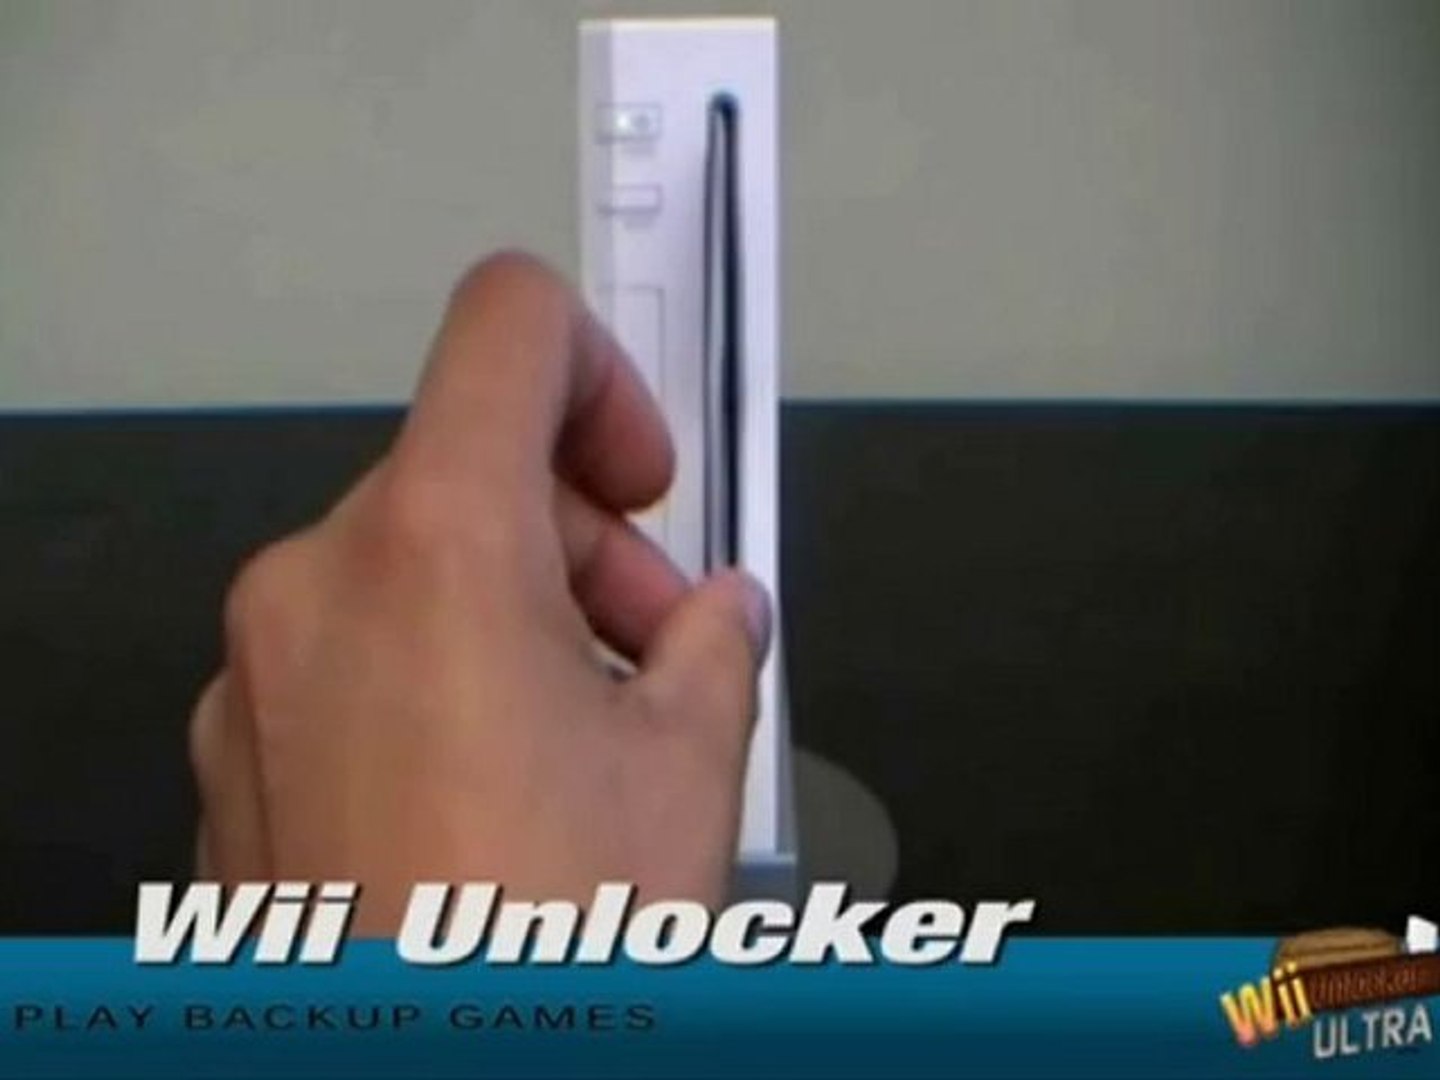 Unlock Wii Console-Learn How to Unlock Wii Console - video Dailymotion